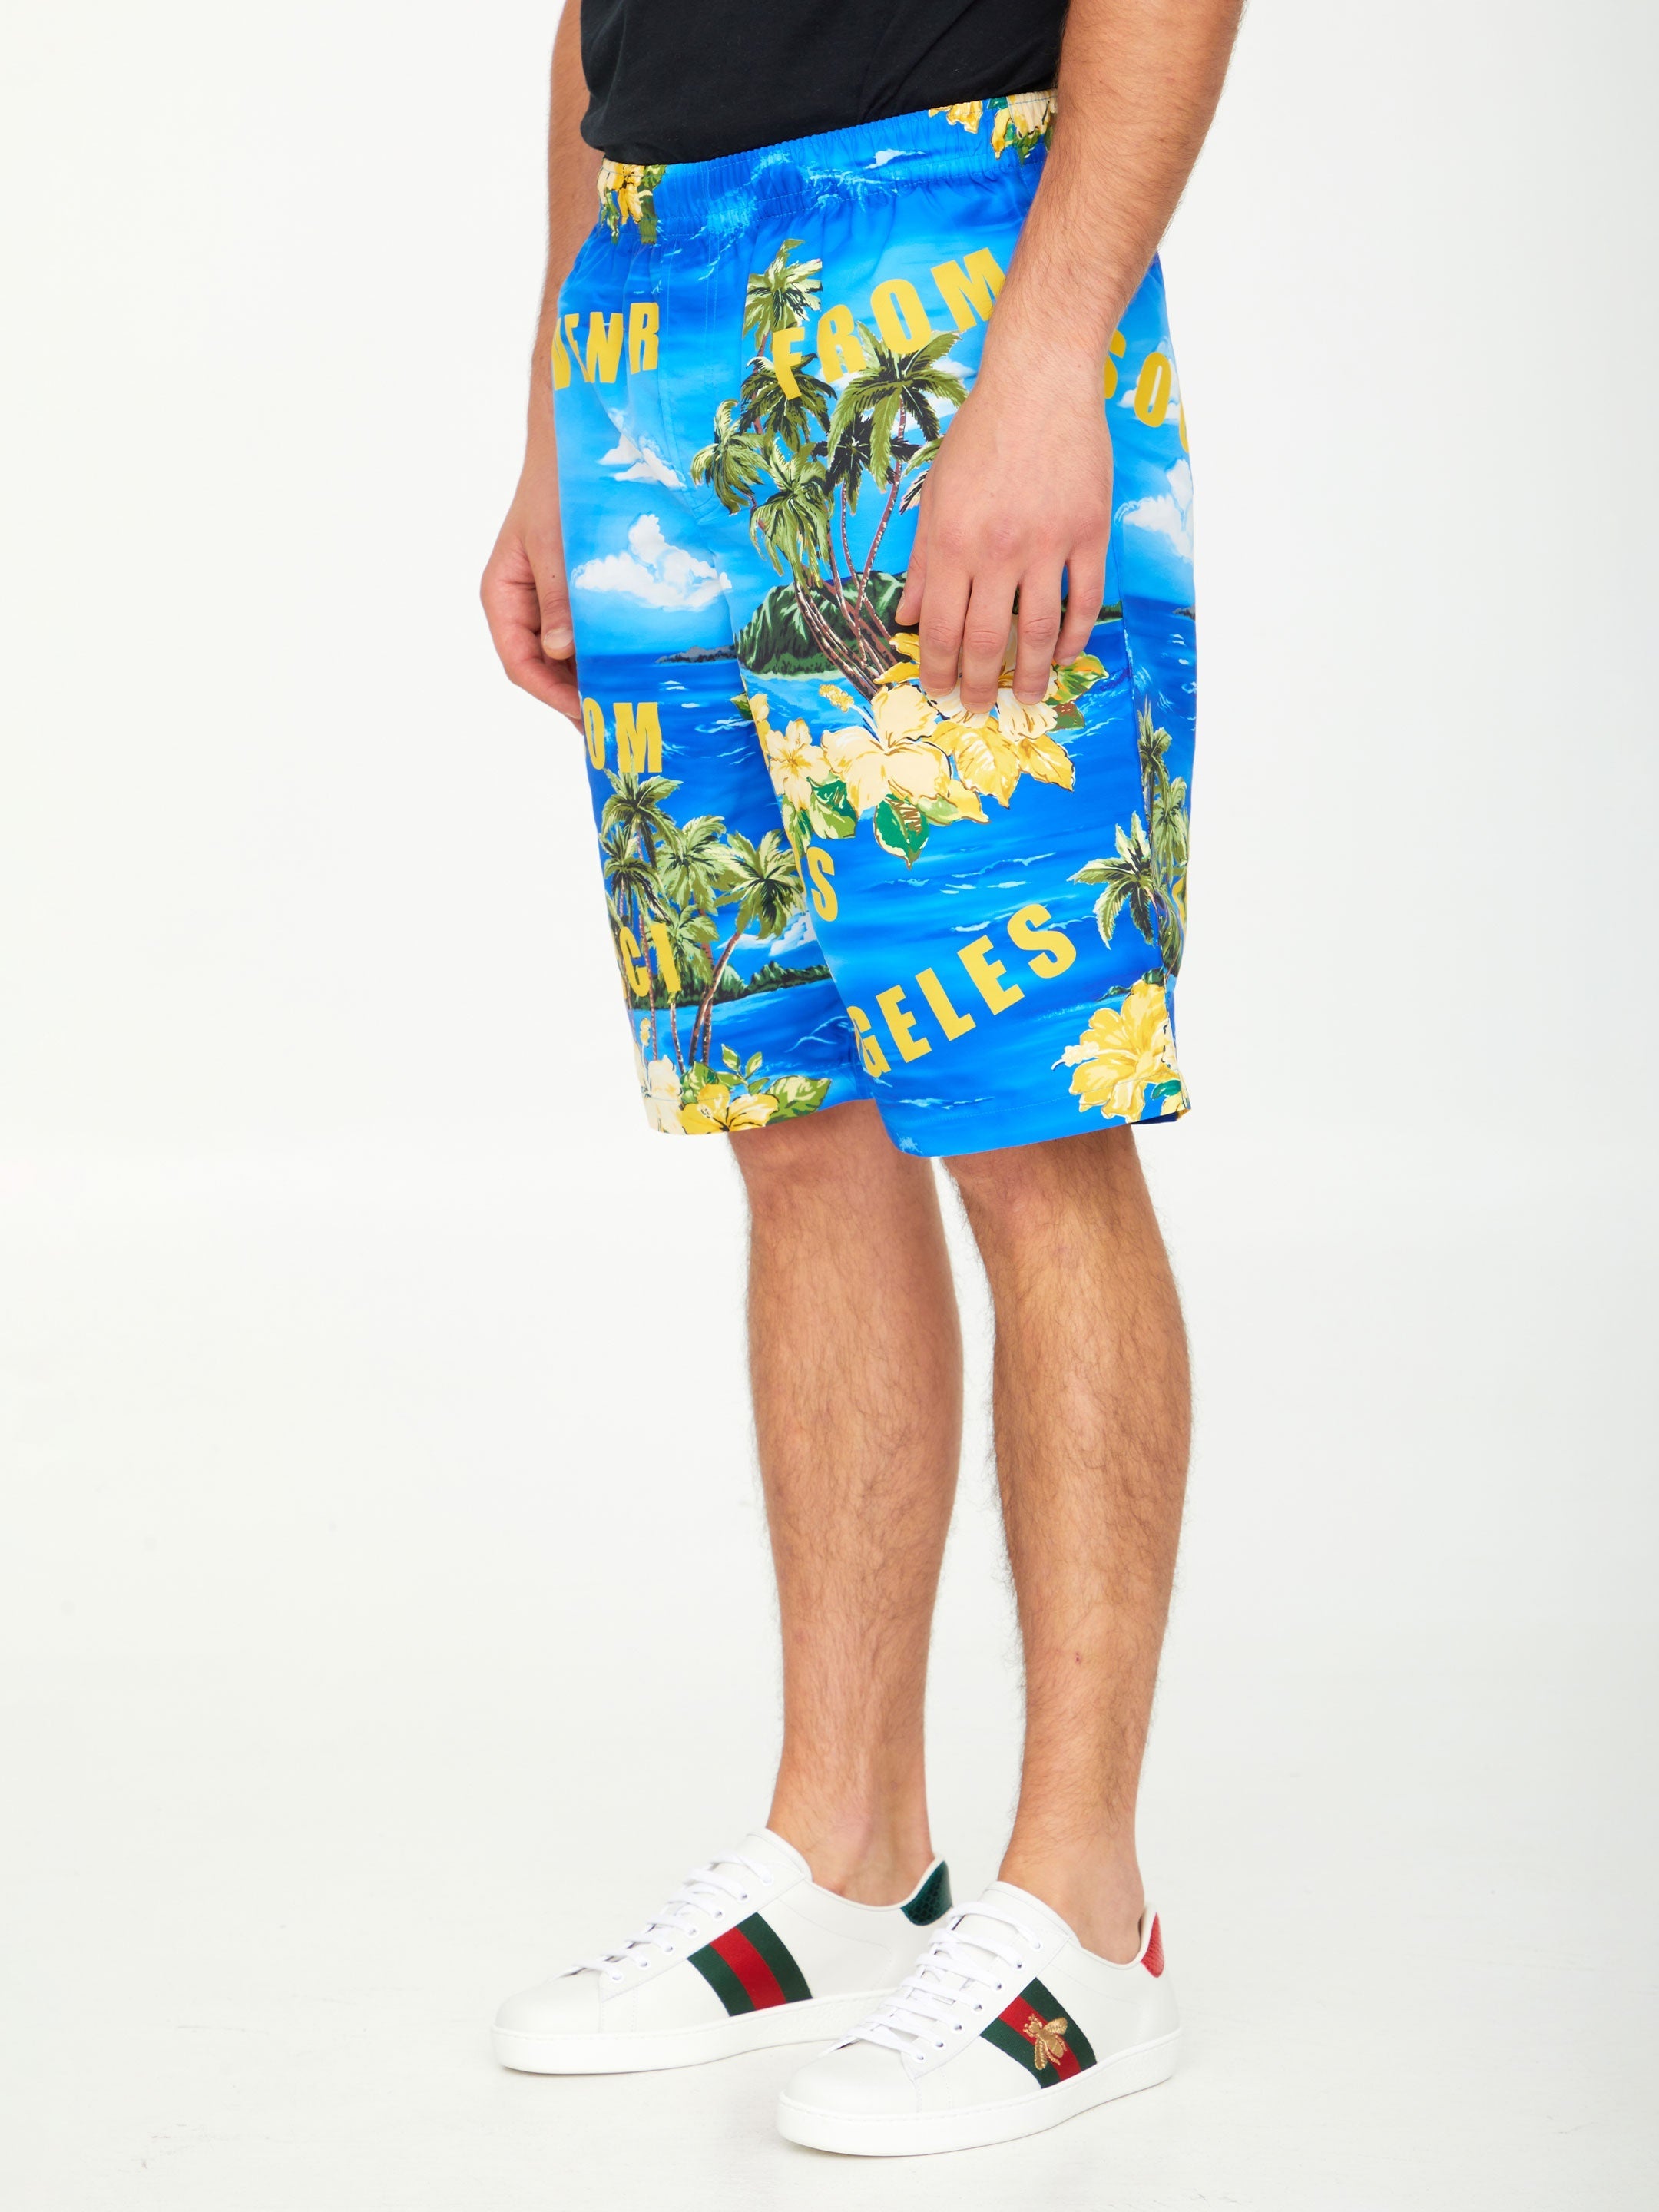 GUCCI-OUTLET-SALE-Printed-nylon-swim-shorts-Hosen-48-BLUE-ARCHIVE-COLLECTION-2.jpg